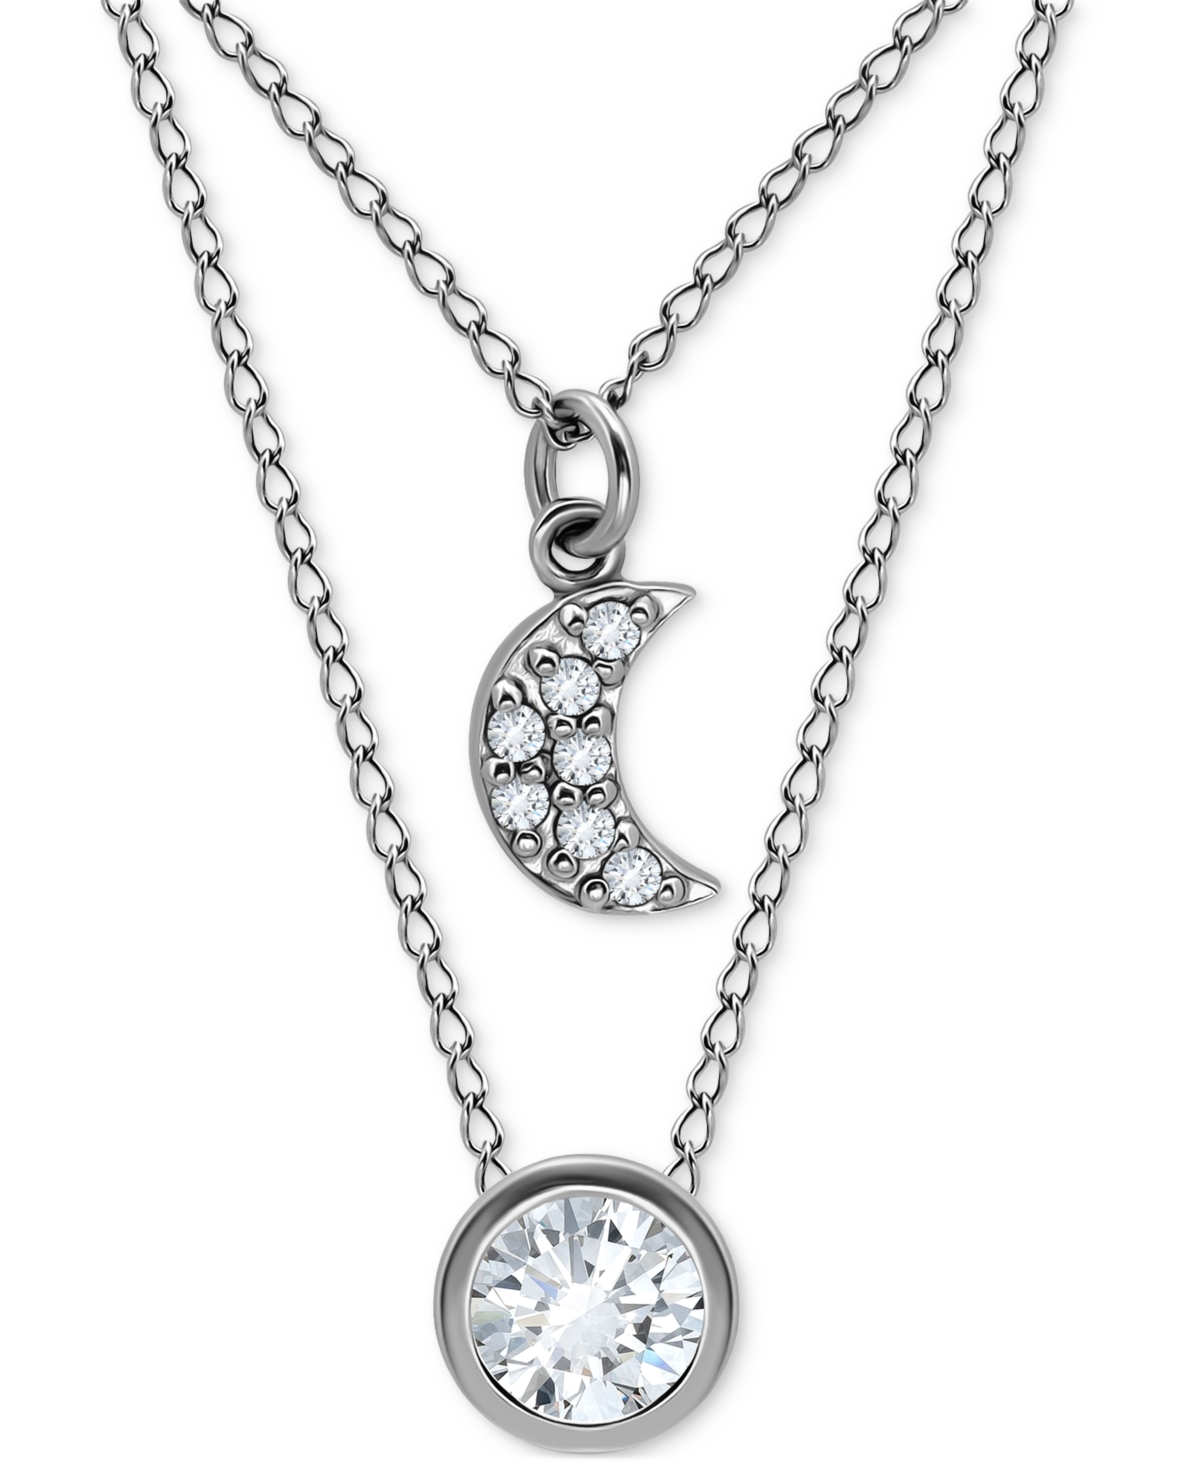 Giani Bernini 2-pc. Set Cubic Zirconia Pave Moon & Solitaire Pendant Necklaces, Created For Macy's In Silver